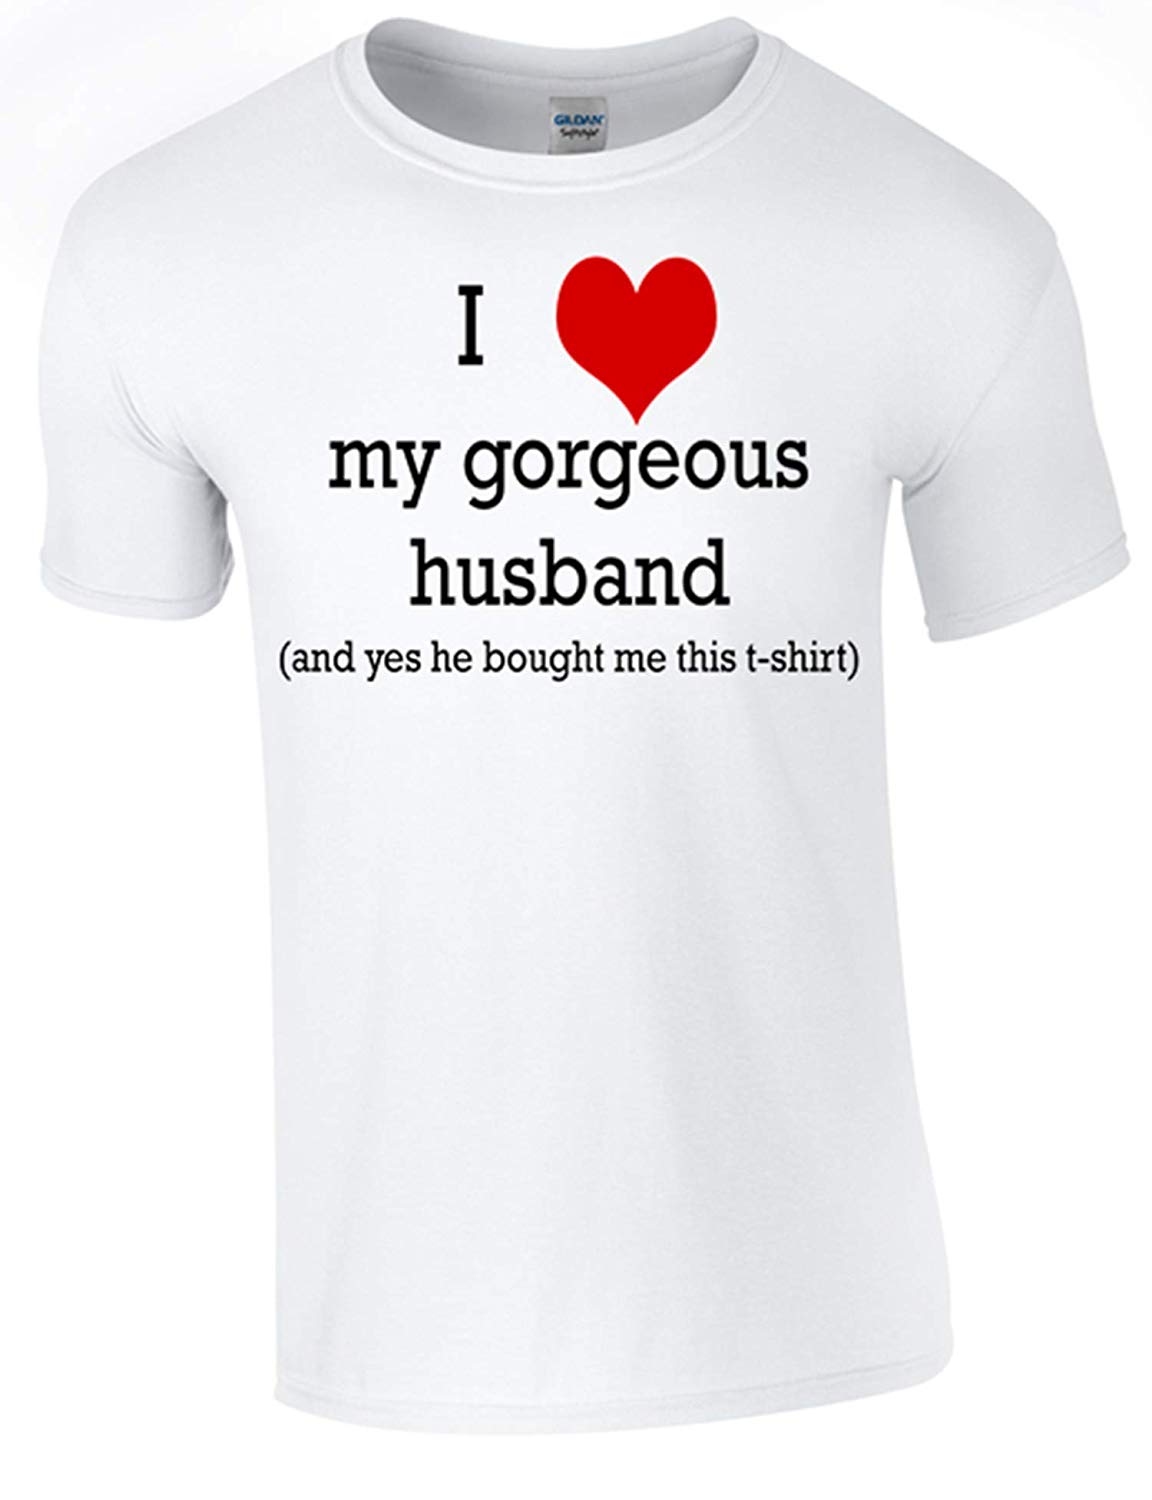 Army 1157 Kit Valentines Gorgeous Husband T-Shirt Printed DTG (Direct to Garment) for a Permanent Finish. - Army 1157 kit White / 3XL Army 1157 Kit Veterans Owned Business